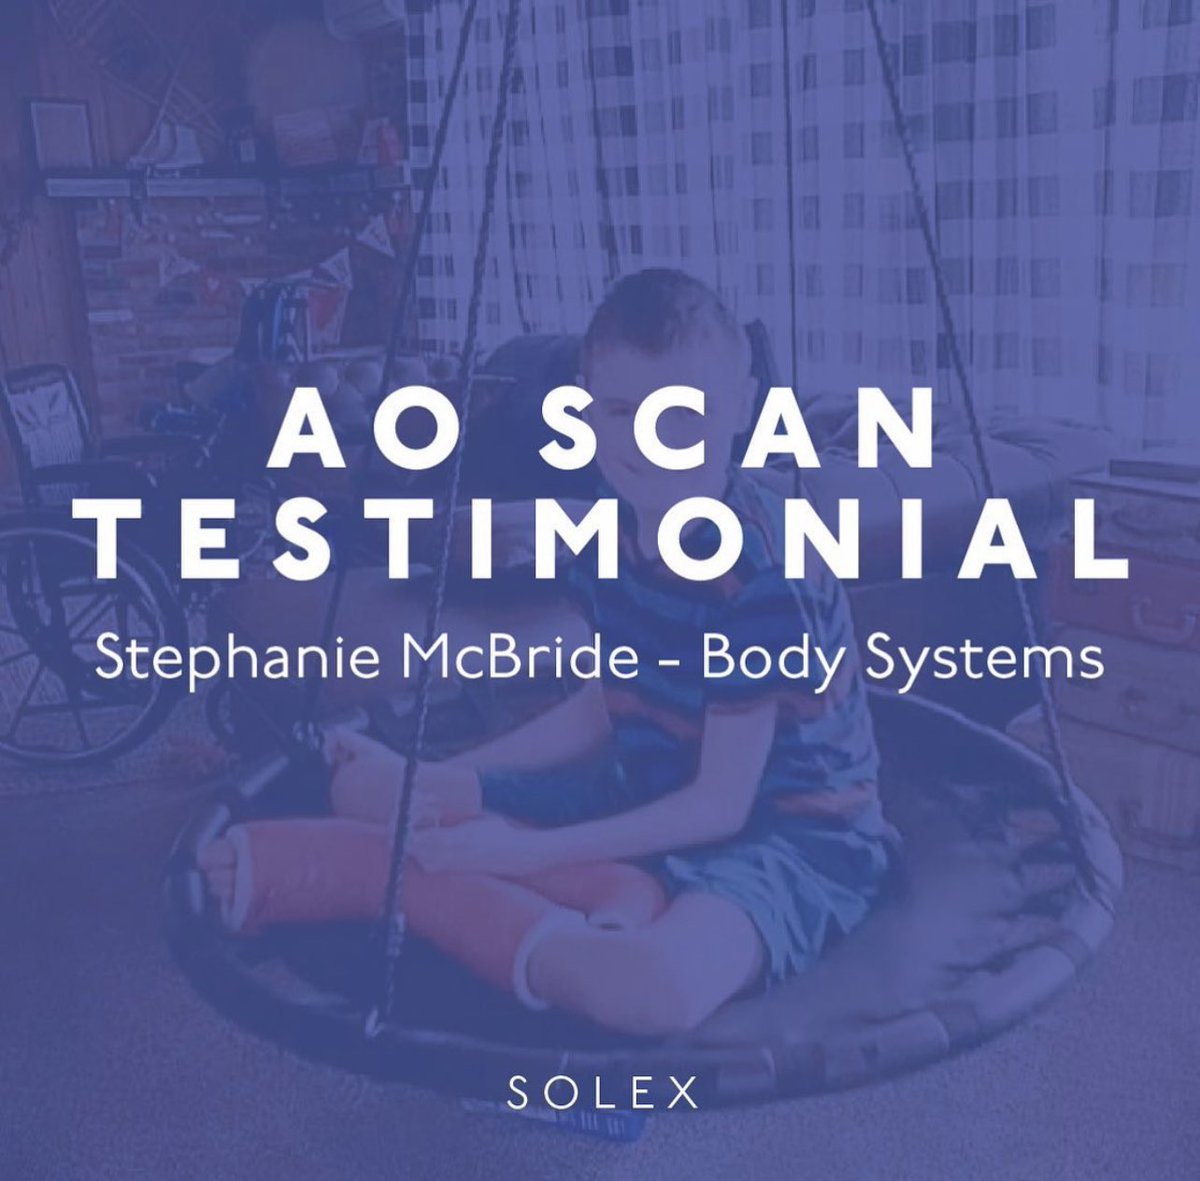 THERE ARE SO MANY  TESTIMONIALS FROM PEOPLE ALL OVER THE WORLD!!! SO EXCITING!! ISolex.Life #HEALING #biohacker #aoscan #frequencytechnology 
@FREQUENCY_QUEEN 
@iSolexlife  @PurveyorofGood